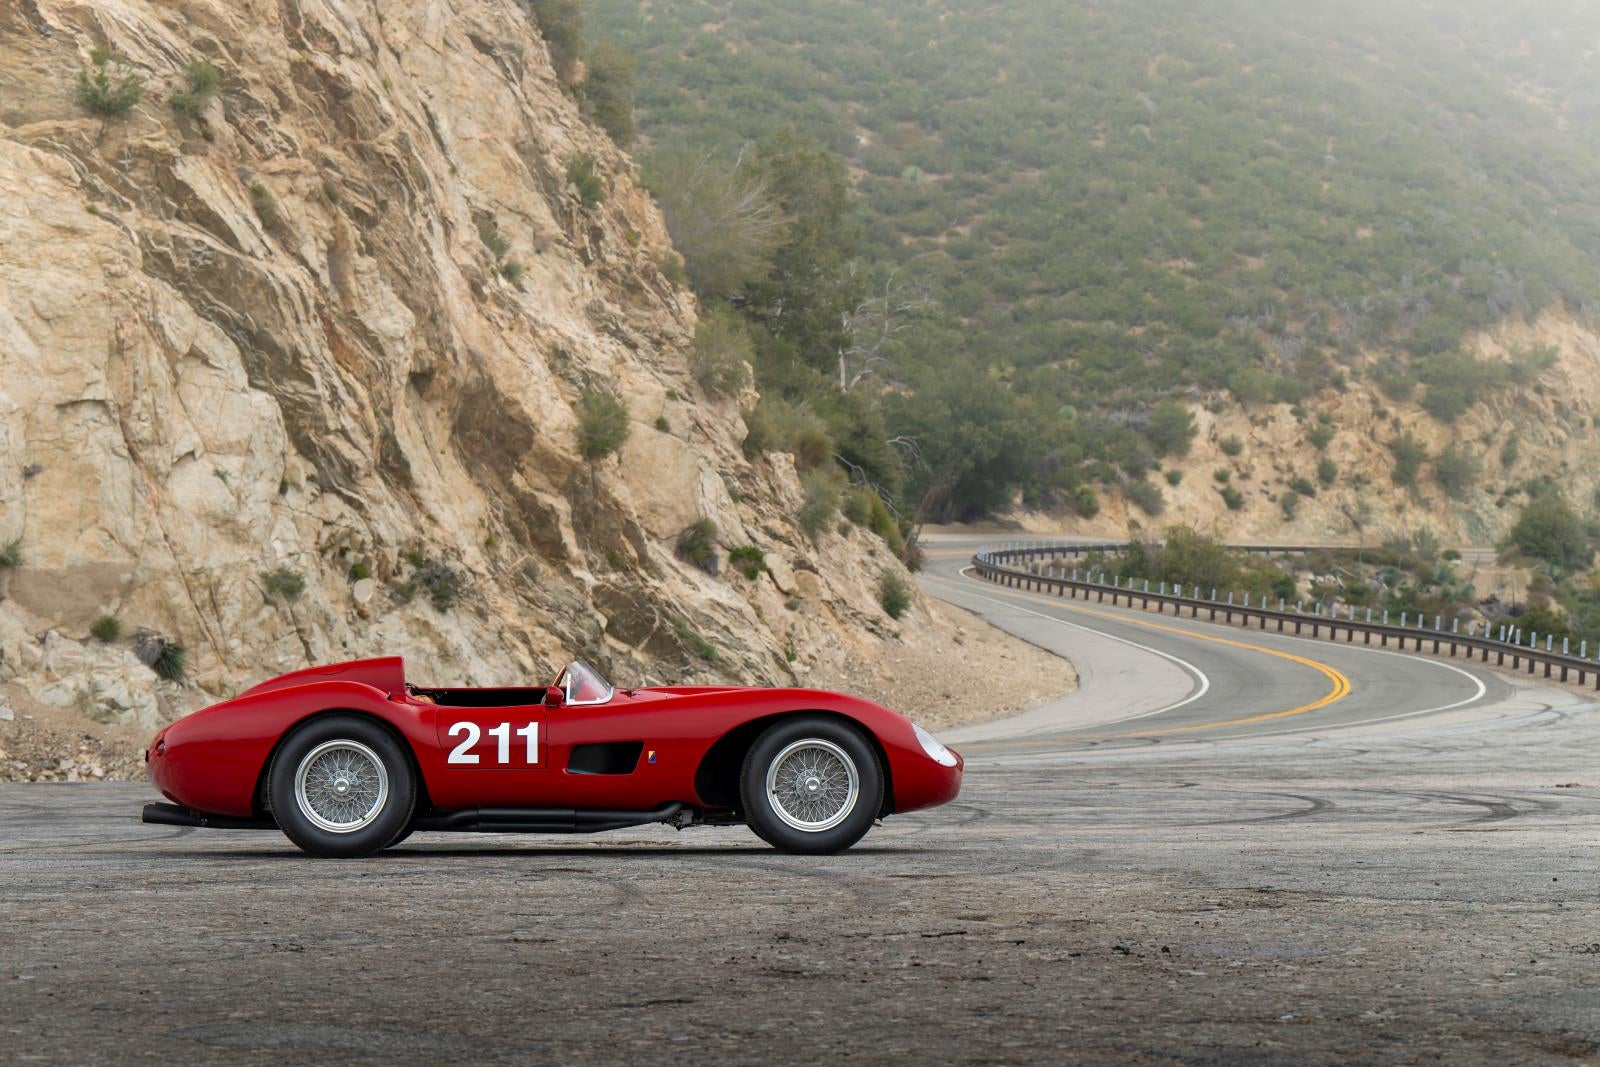 The 1957 Ferrari 625 TRC Spider pictured against cliffs on a mountain road.